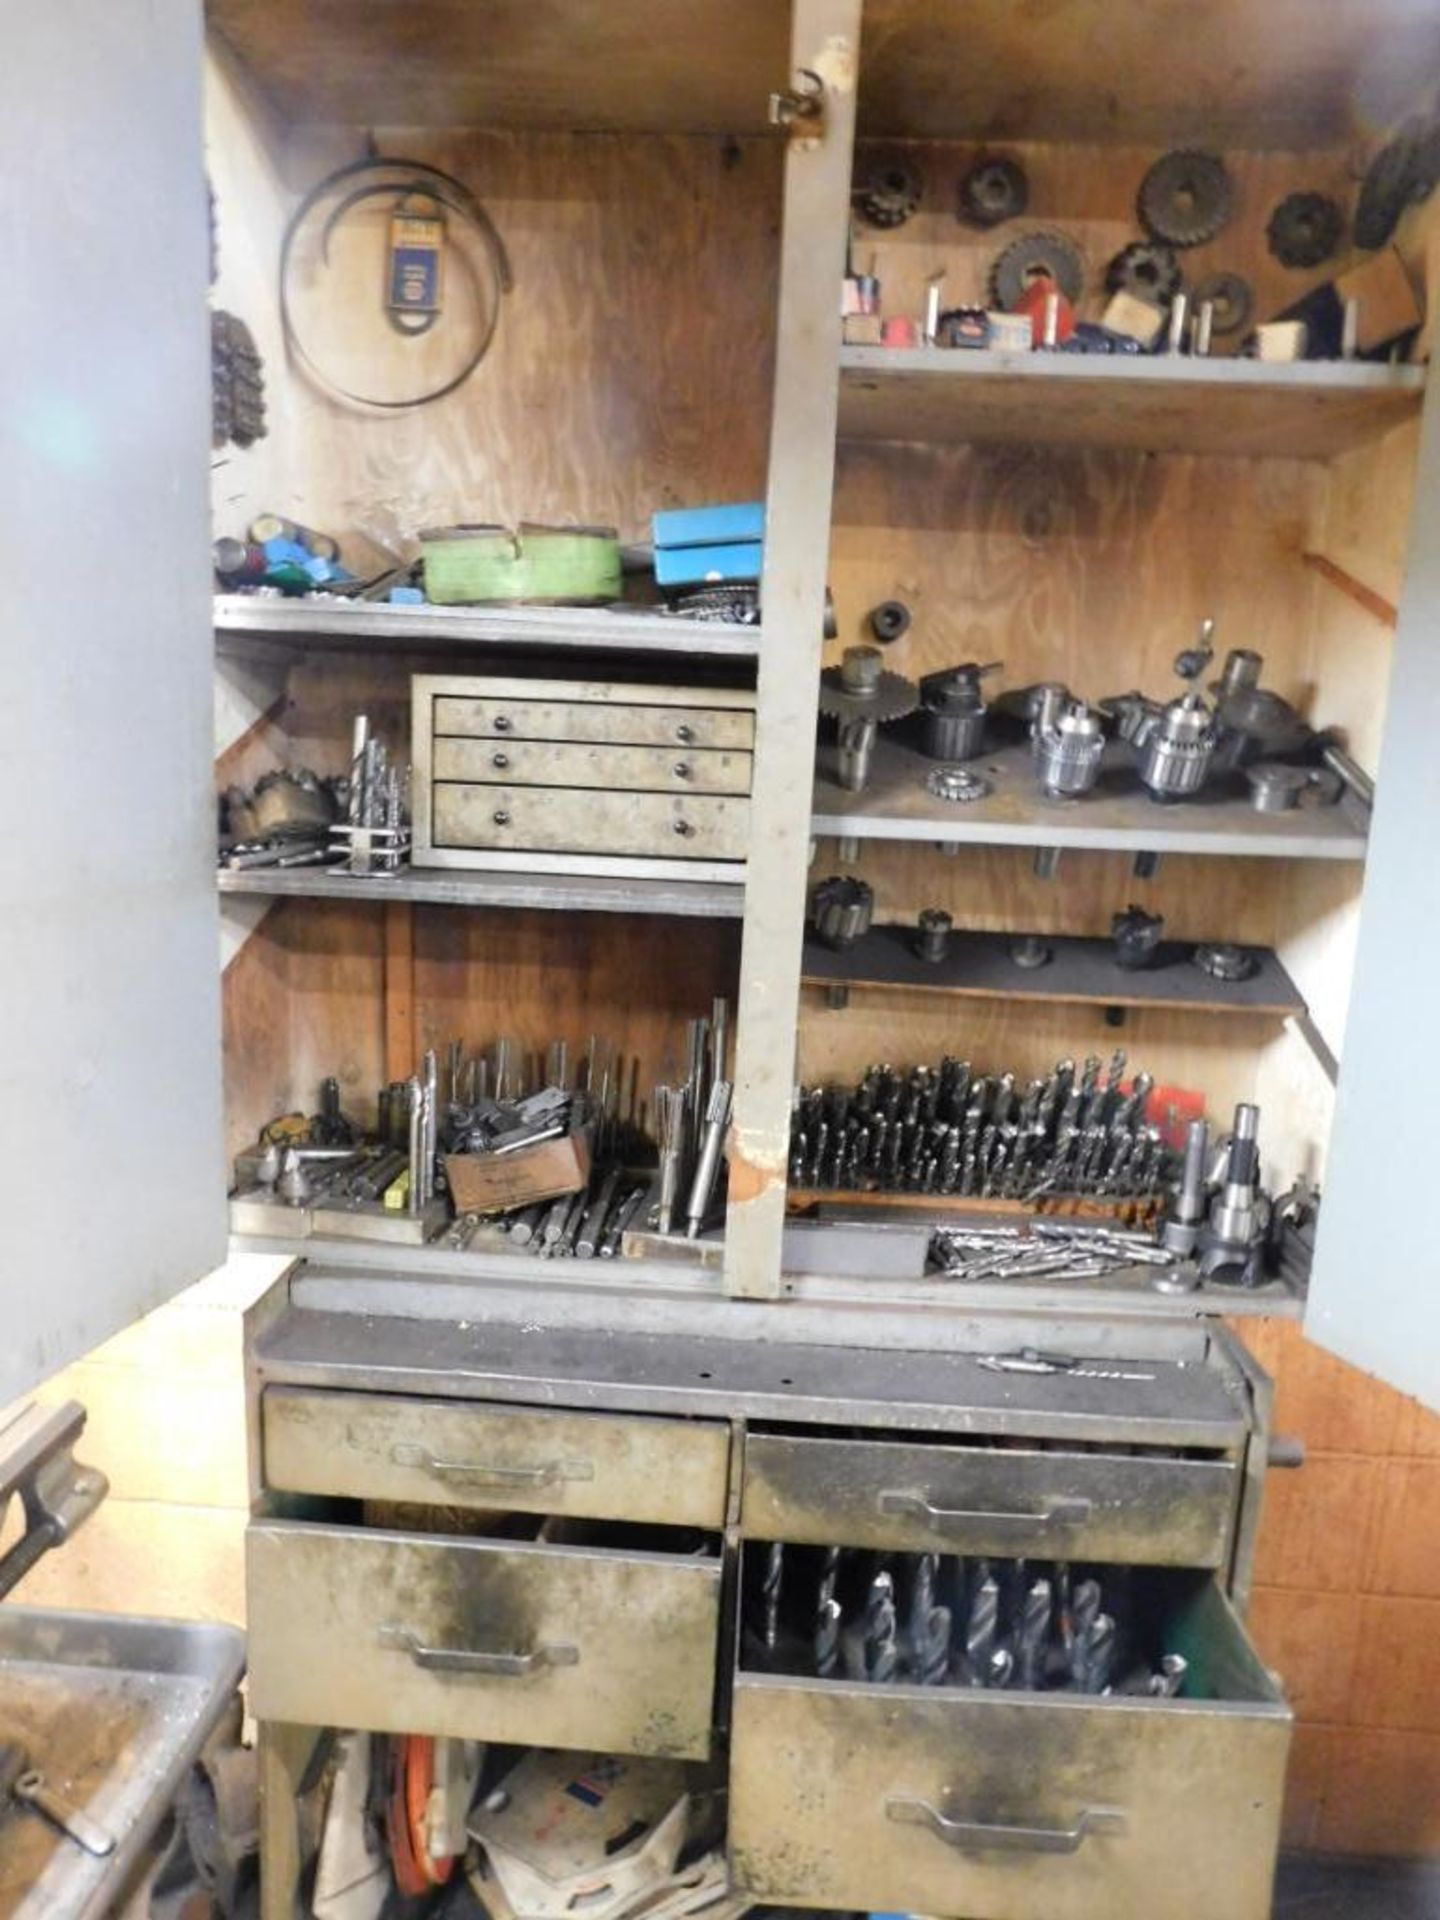 LOT: Assorted Drill Bits, Reamers, Drill Chucks, Cutters, Collets, etc. in Cart & Cabinet